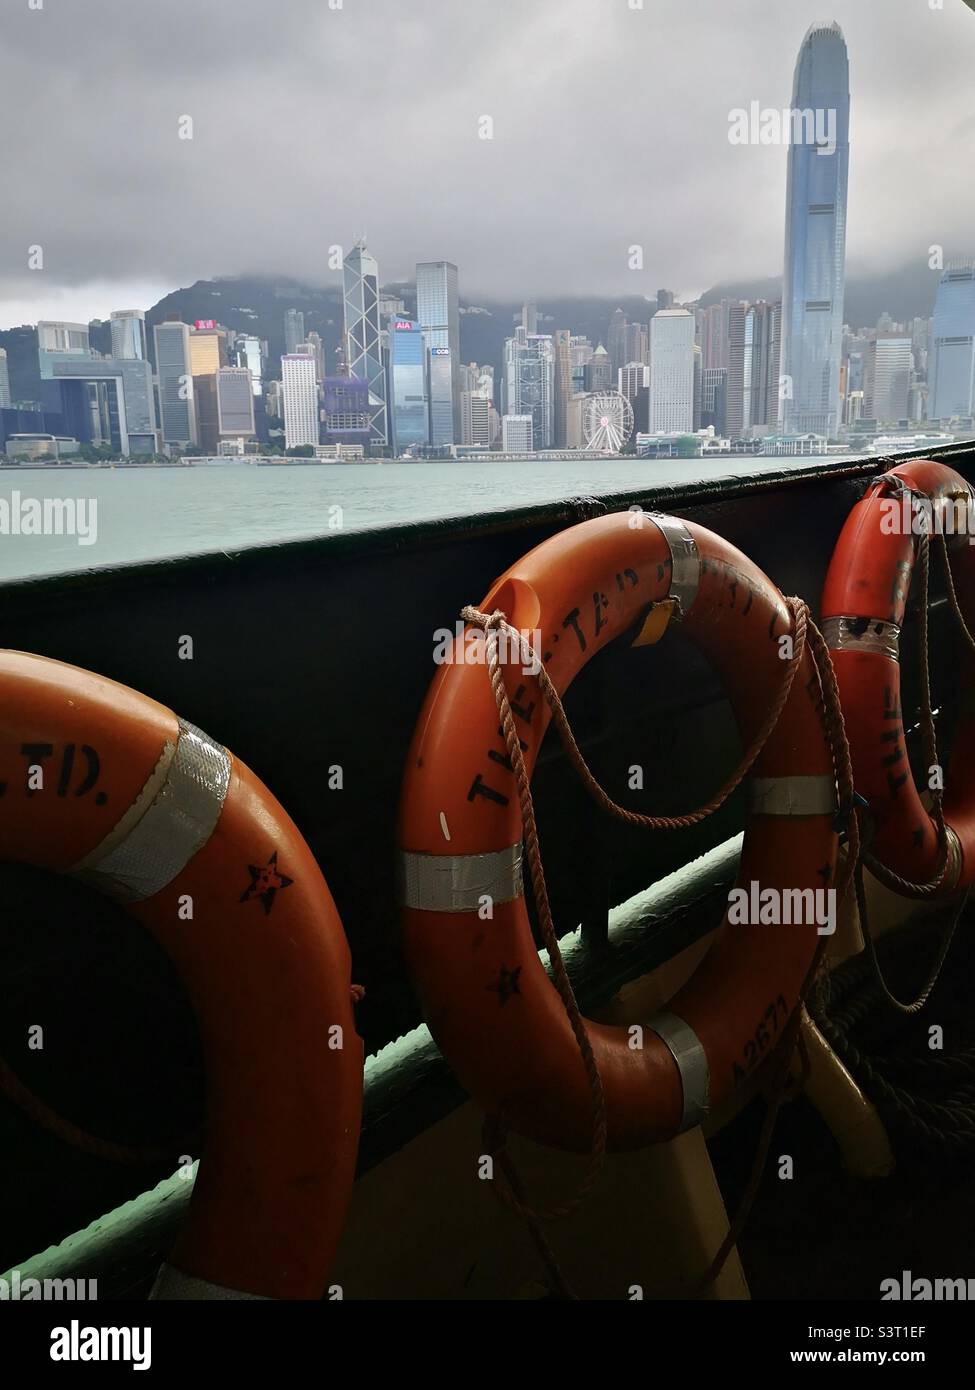 Riding on the Star Ferry in Hong Kong. Stock Photo